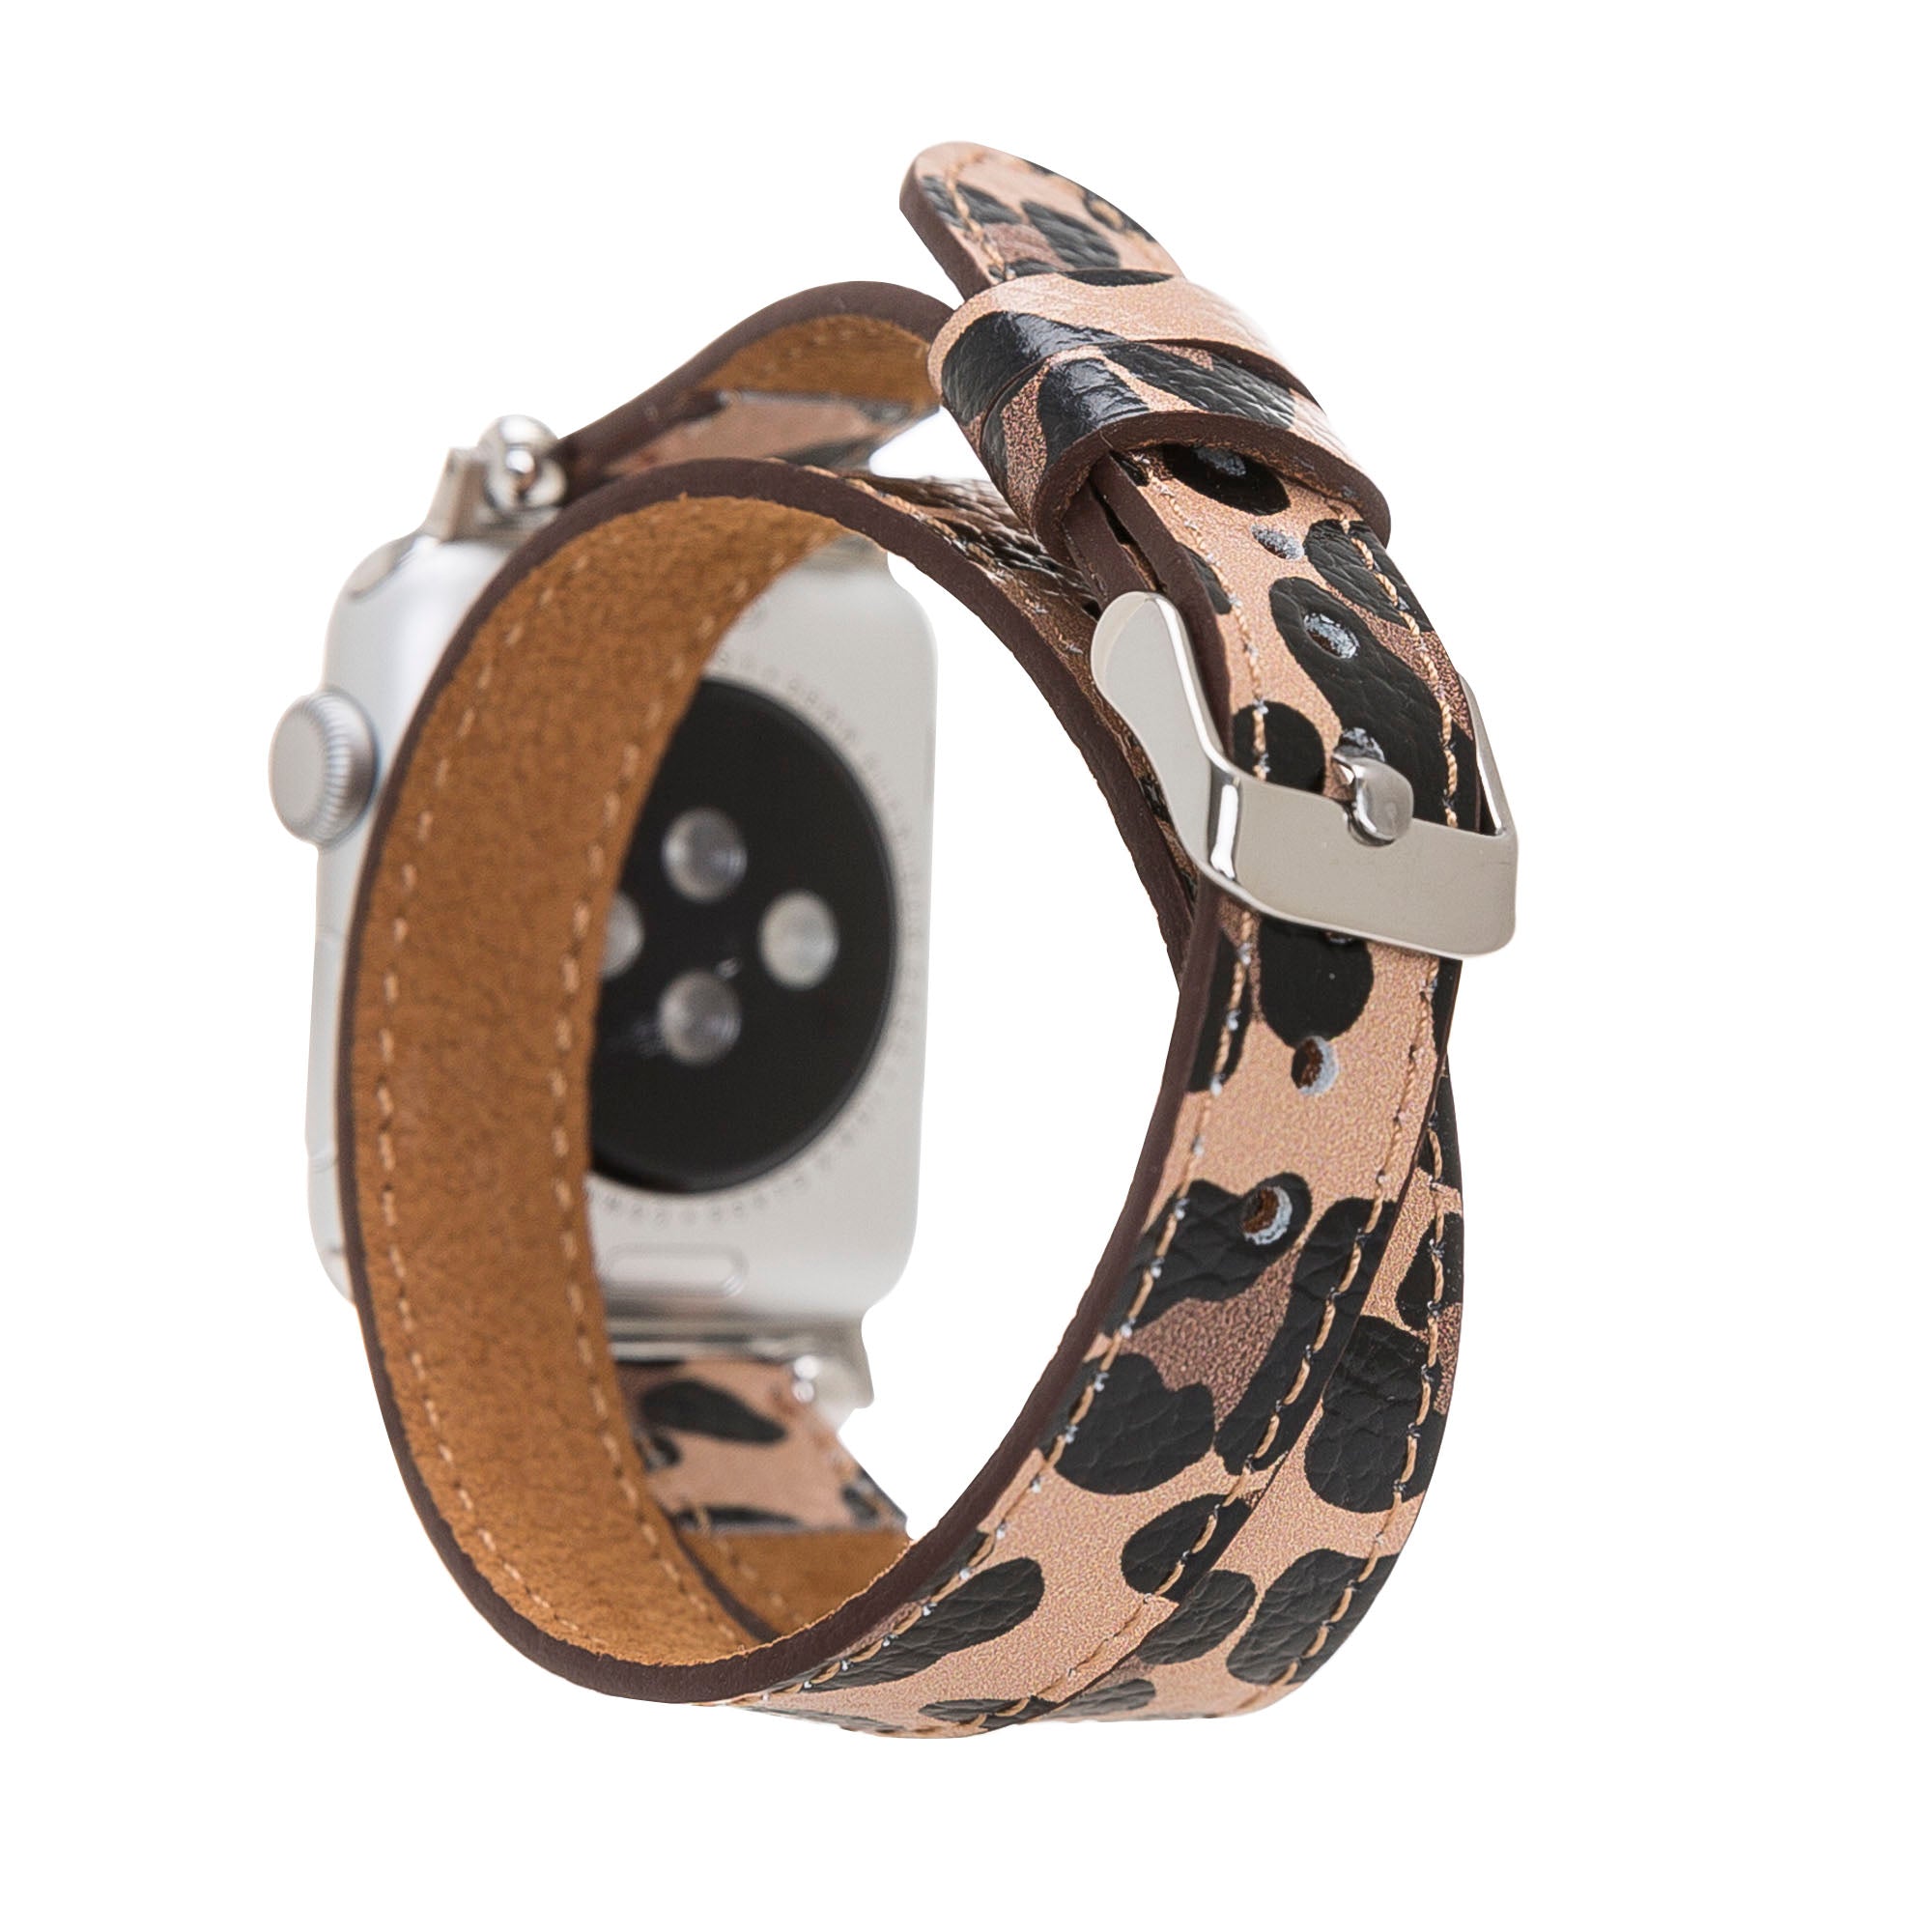 DelfiCase Chester Double Watch Band for Apple Watch (Leopard Pattern) 2